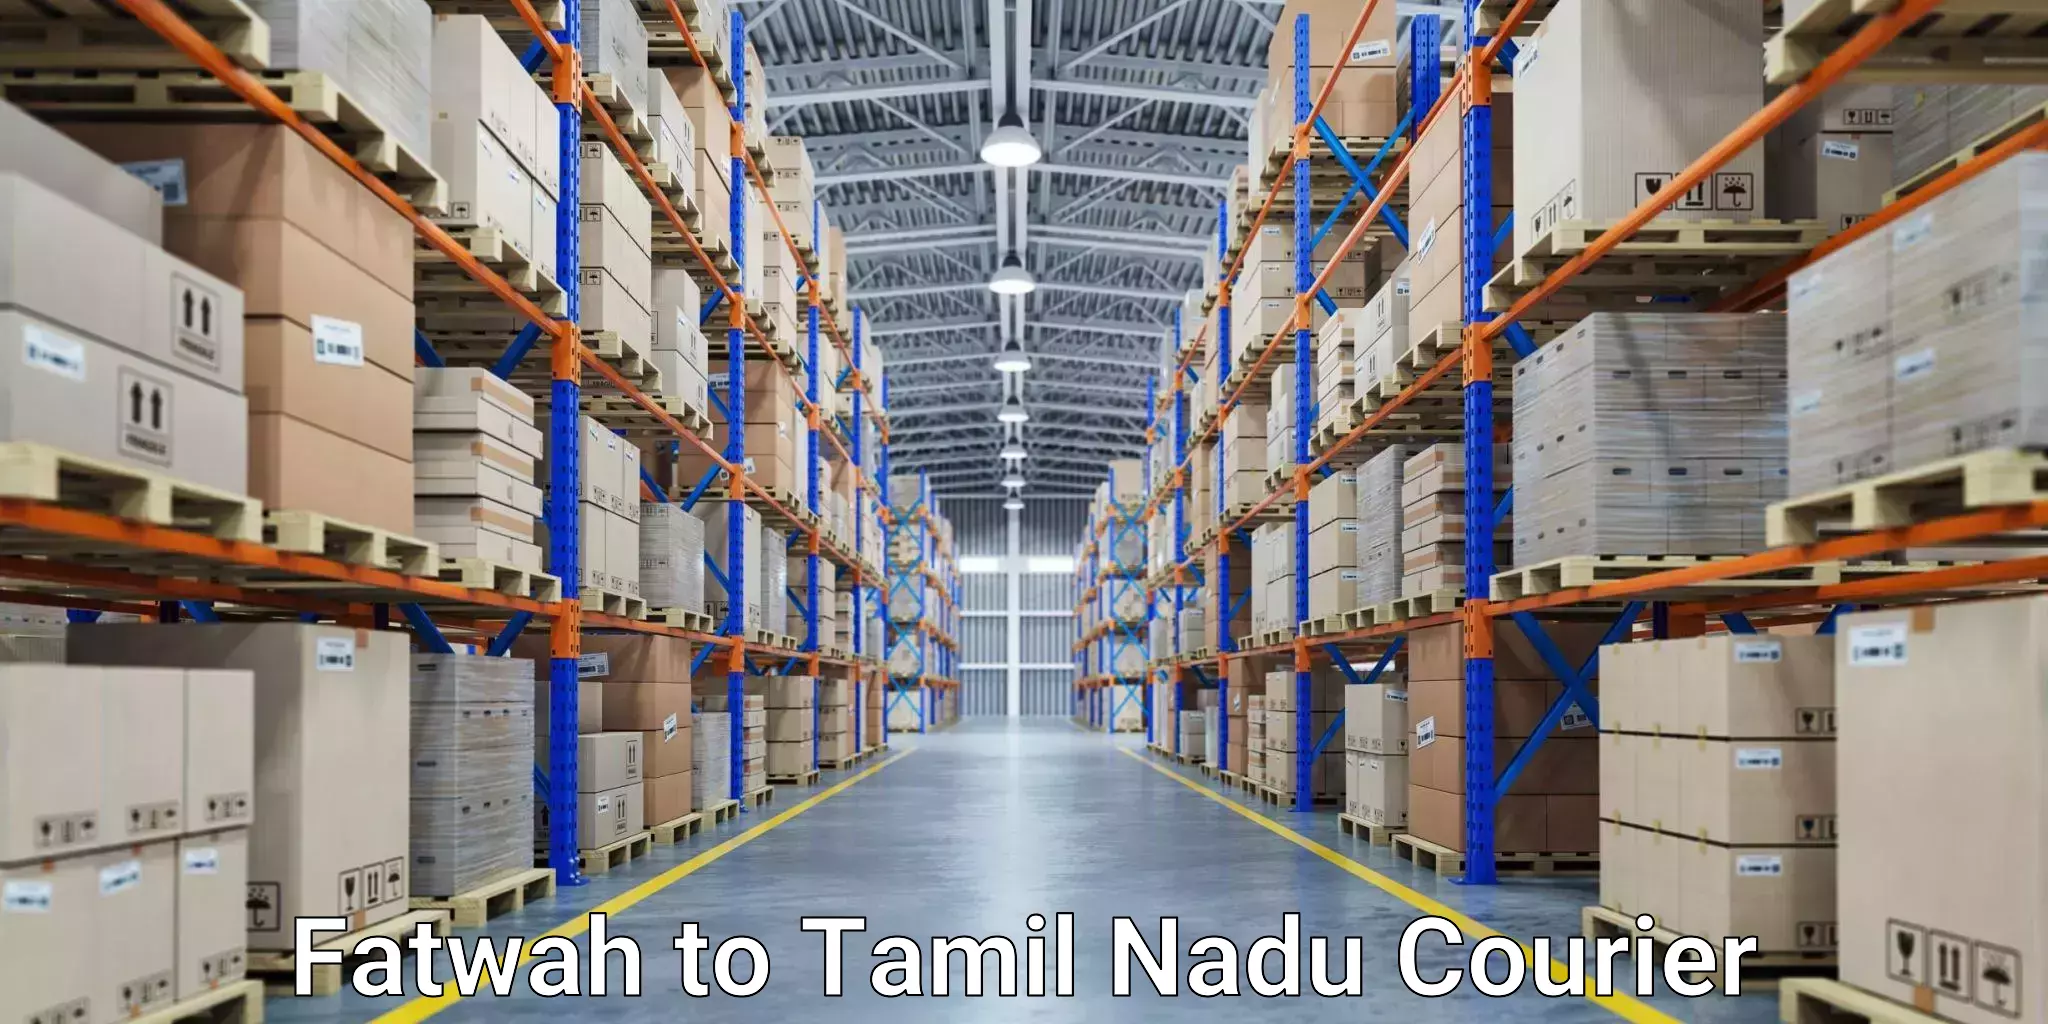 Courier service efficiency Fatwah to Tuticorin Port